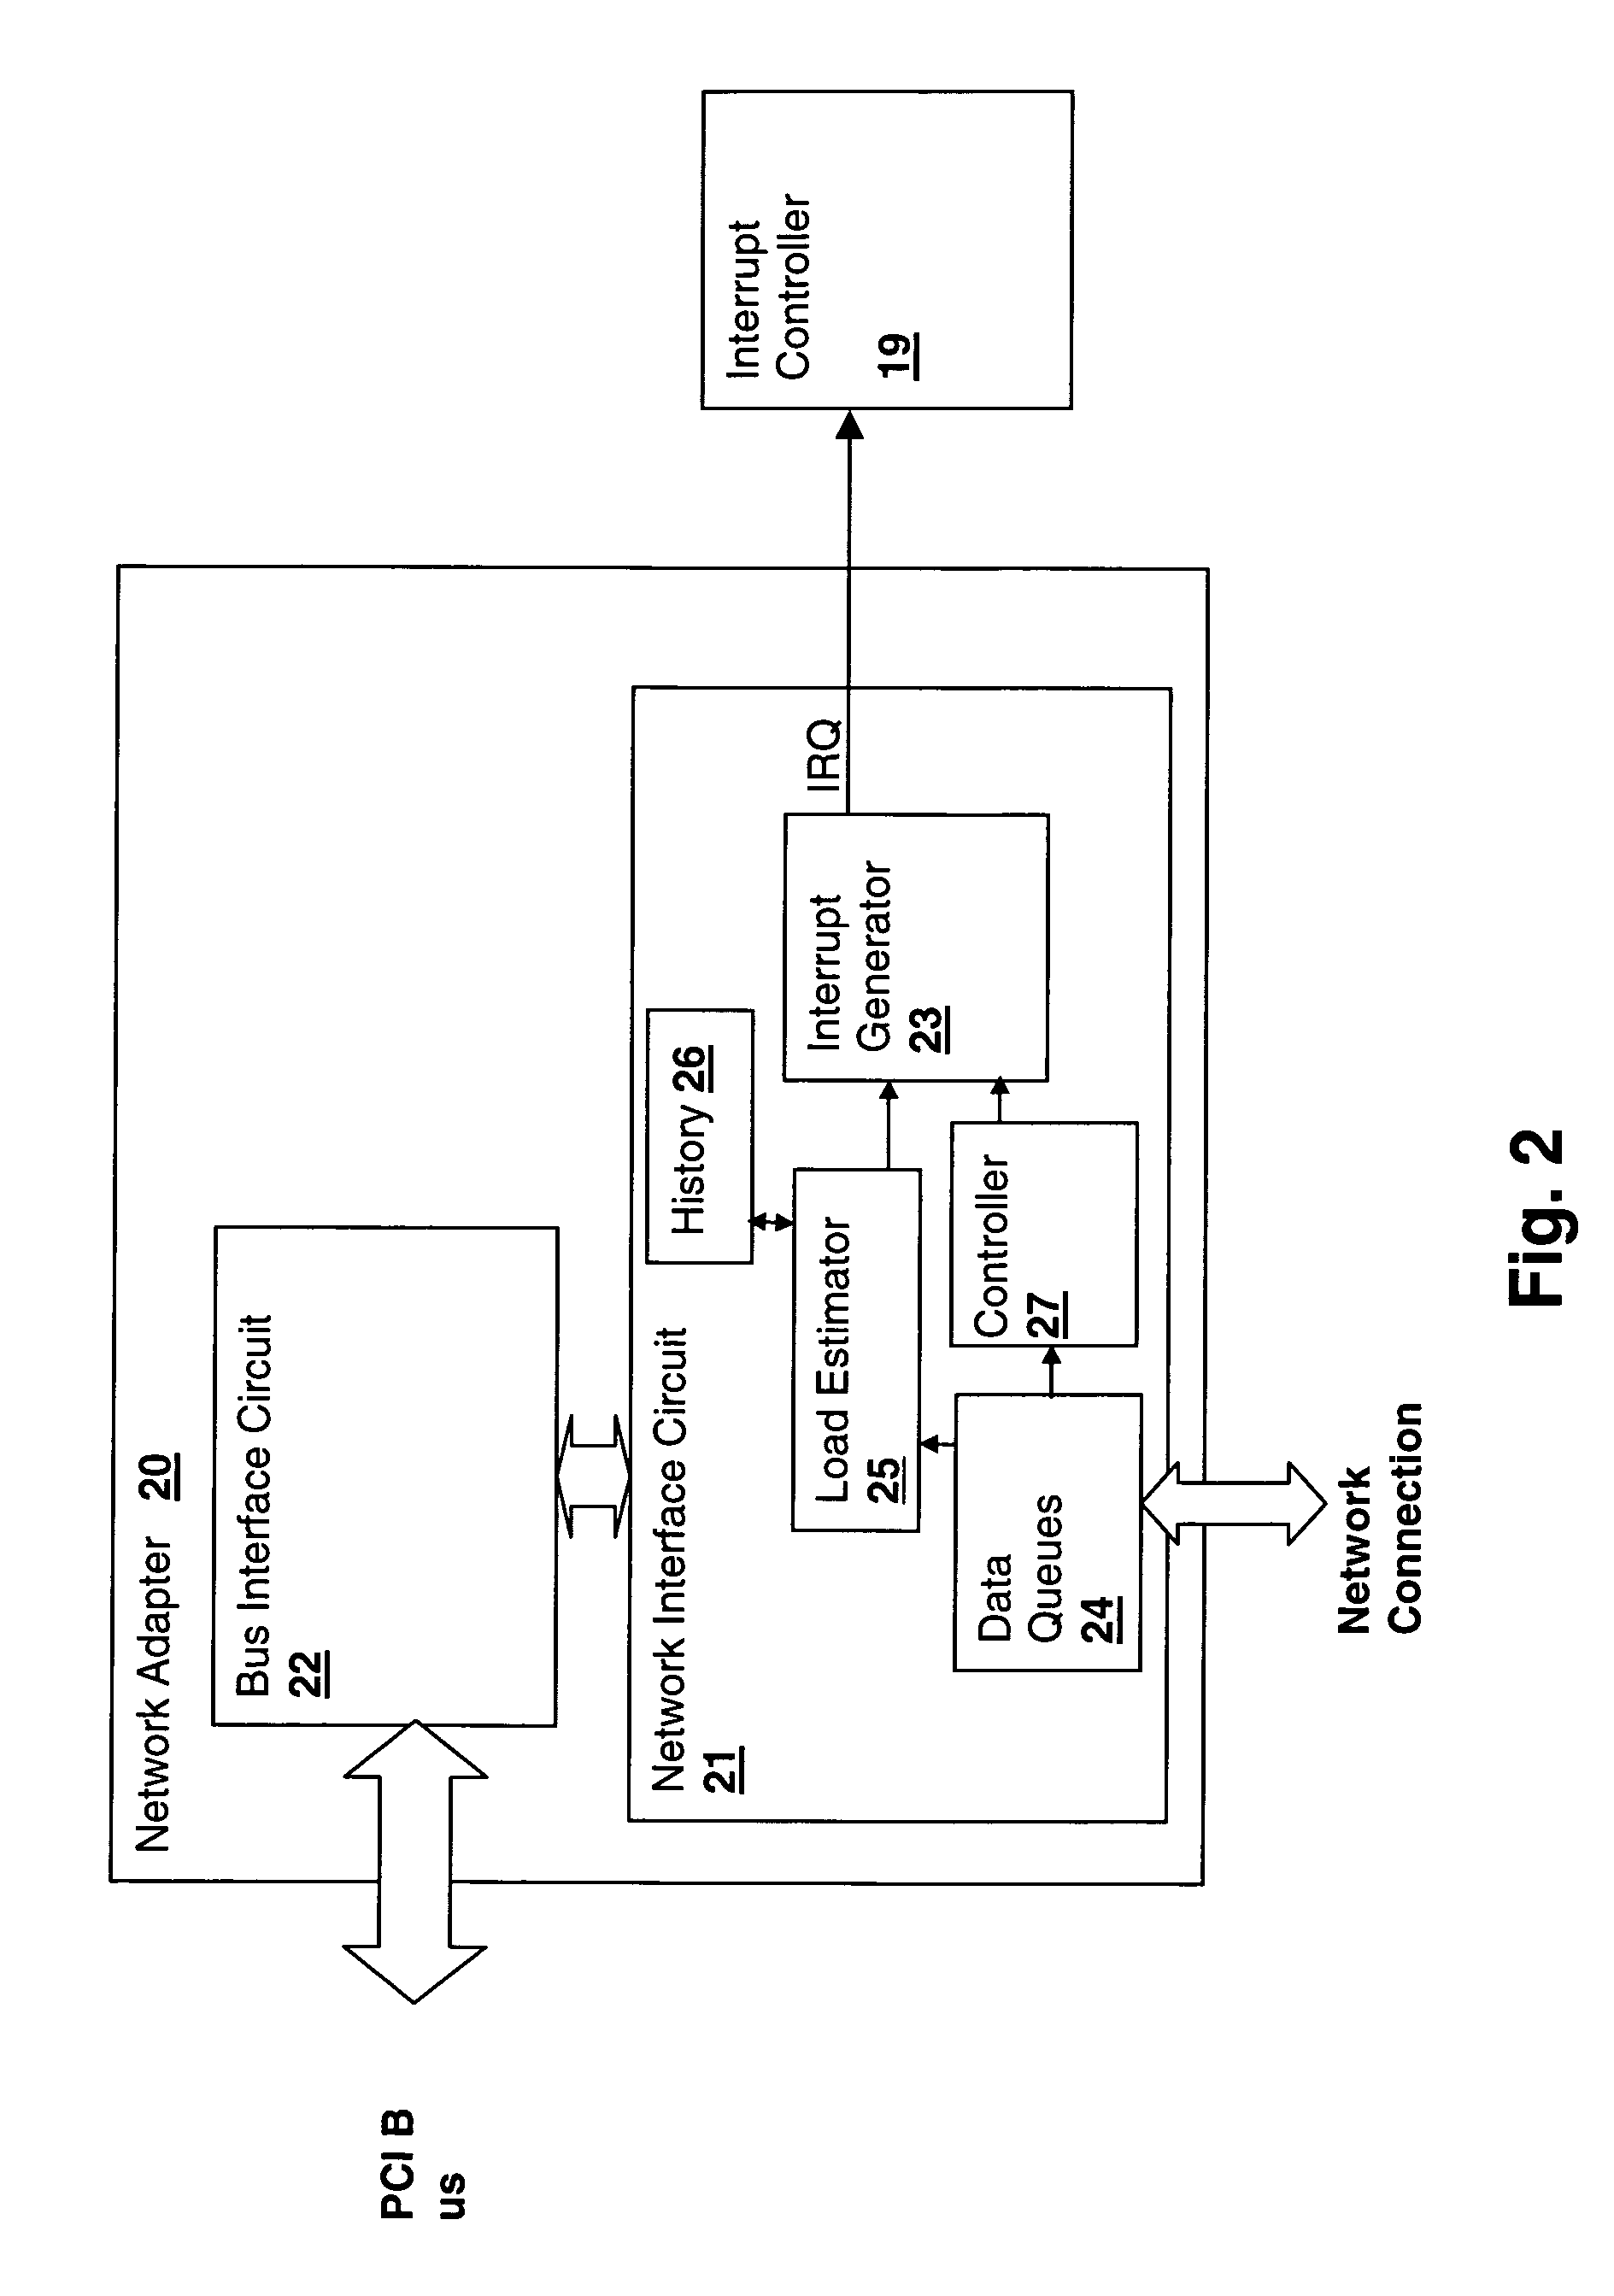 Method for controlling peripheral adapter interrupt frequency by estimating processor load in the peripheral adapter